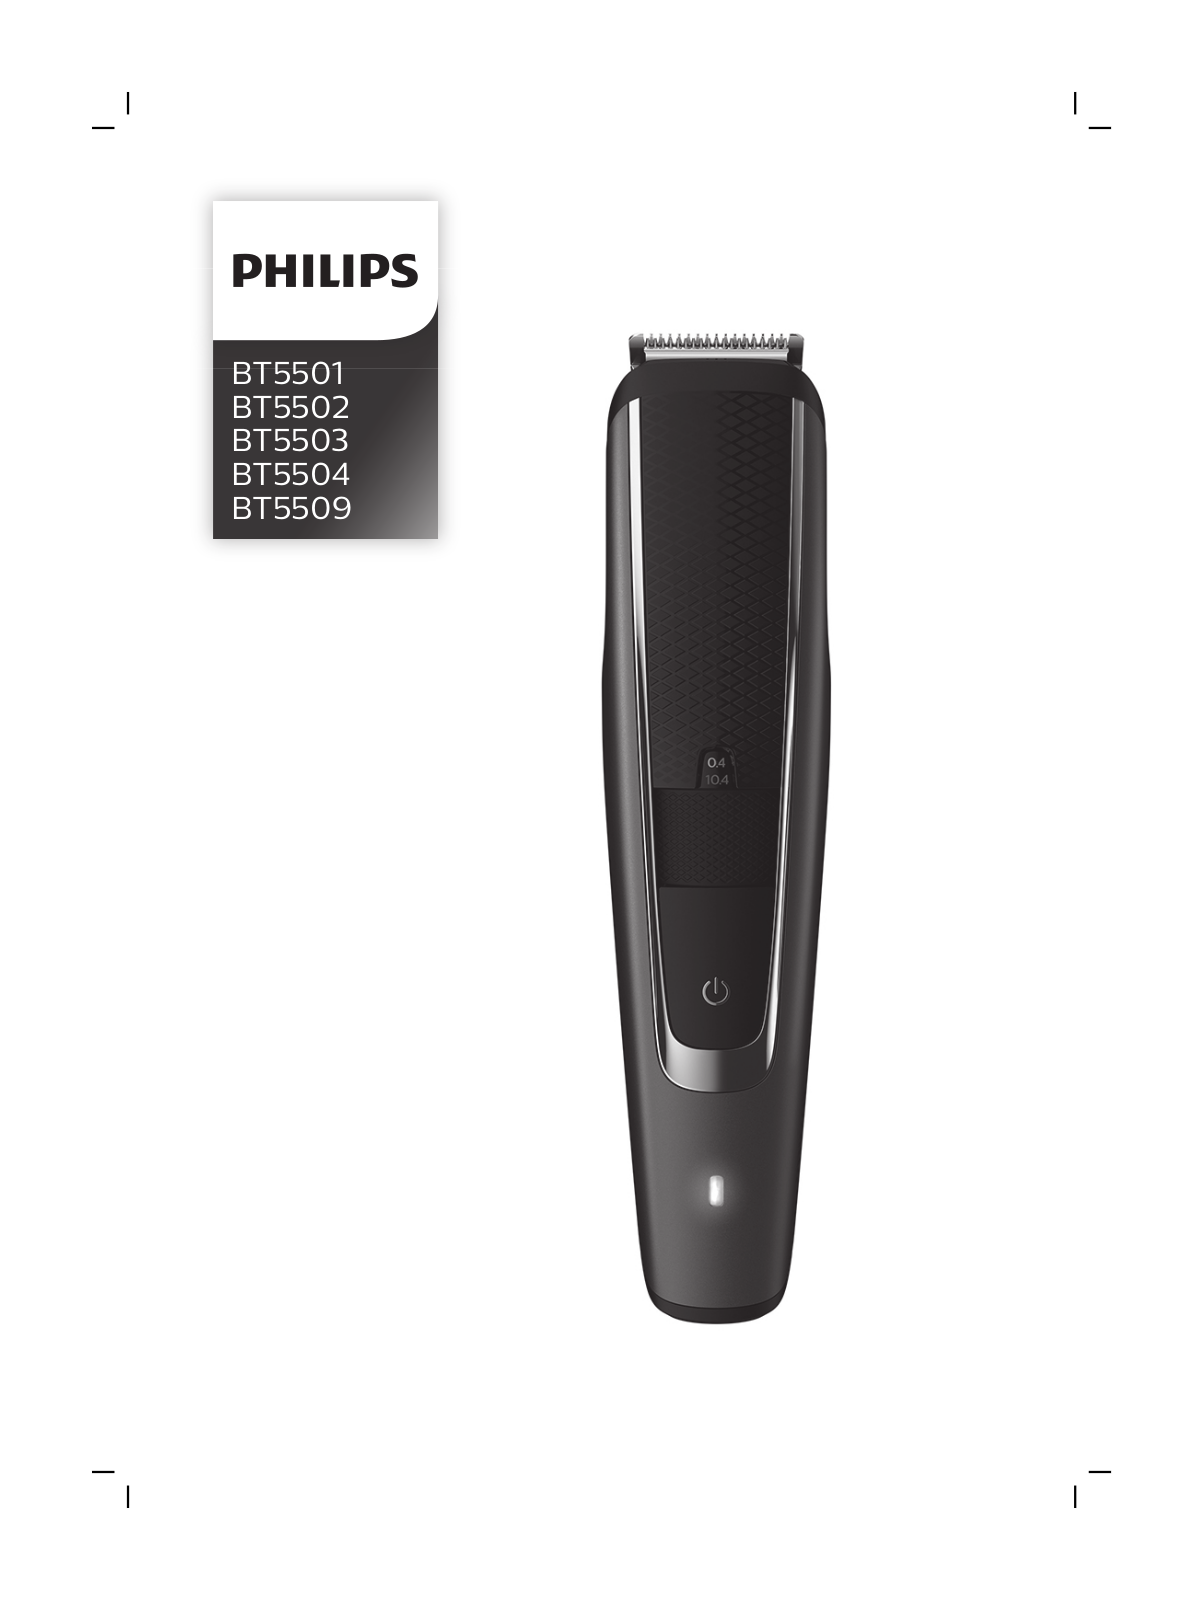 Philips BT5509-16 operation manual